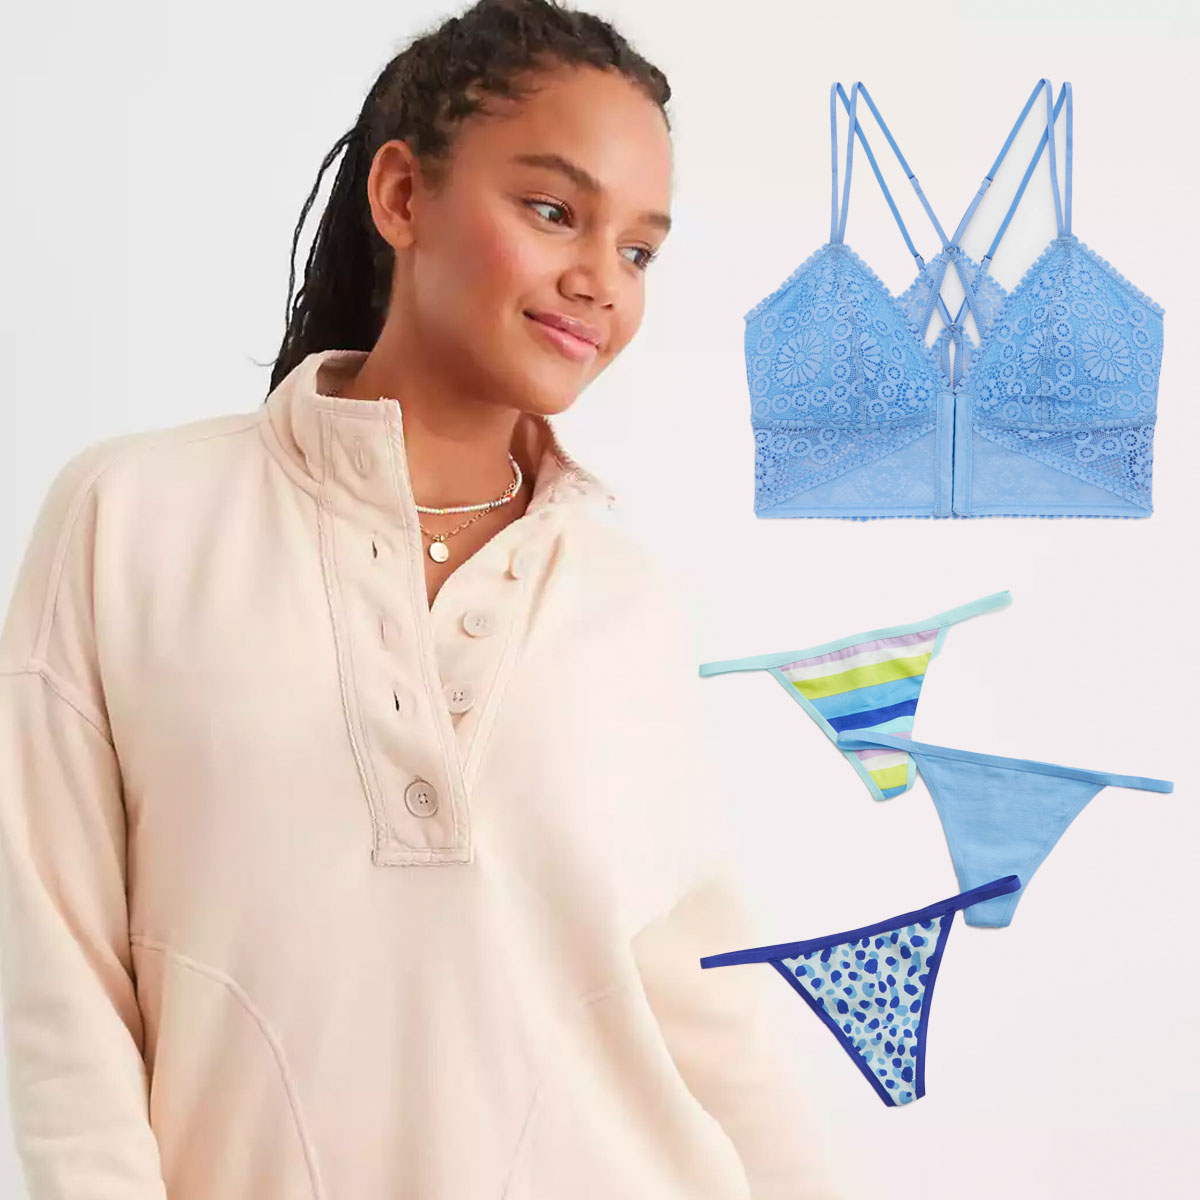 So Many Comfy Aerie Bras, Bralettes, and Underwear Are on Sale